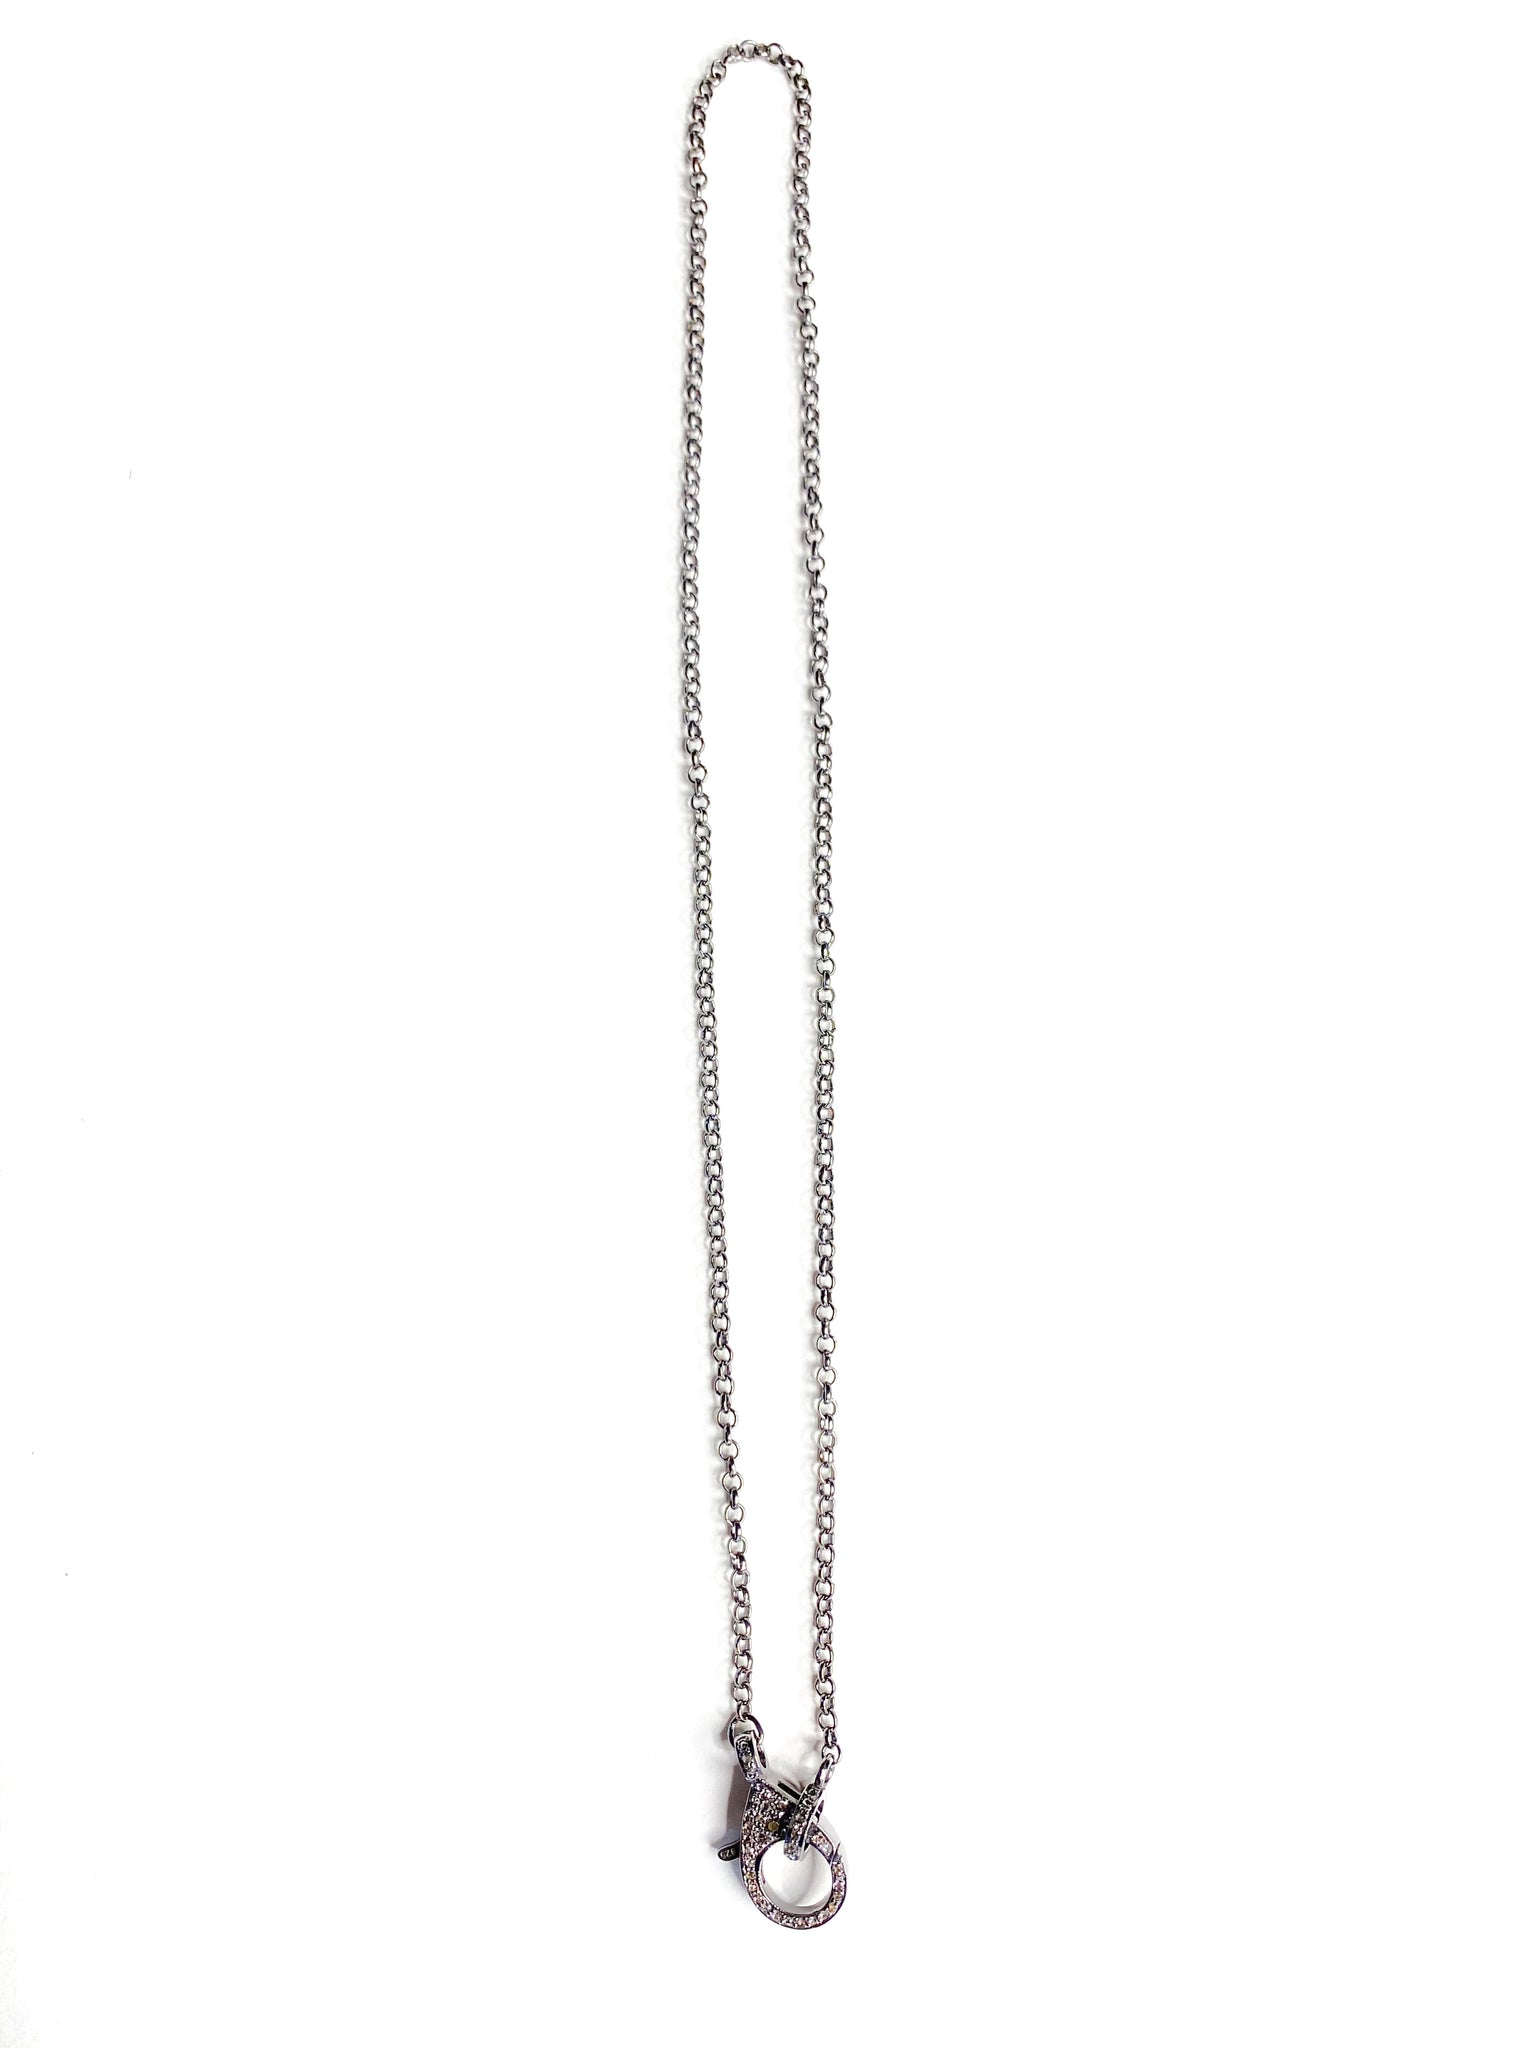 Skinny Sterling Silver Chain with Pave Diamond Clasp